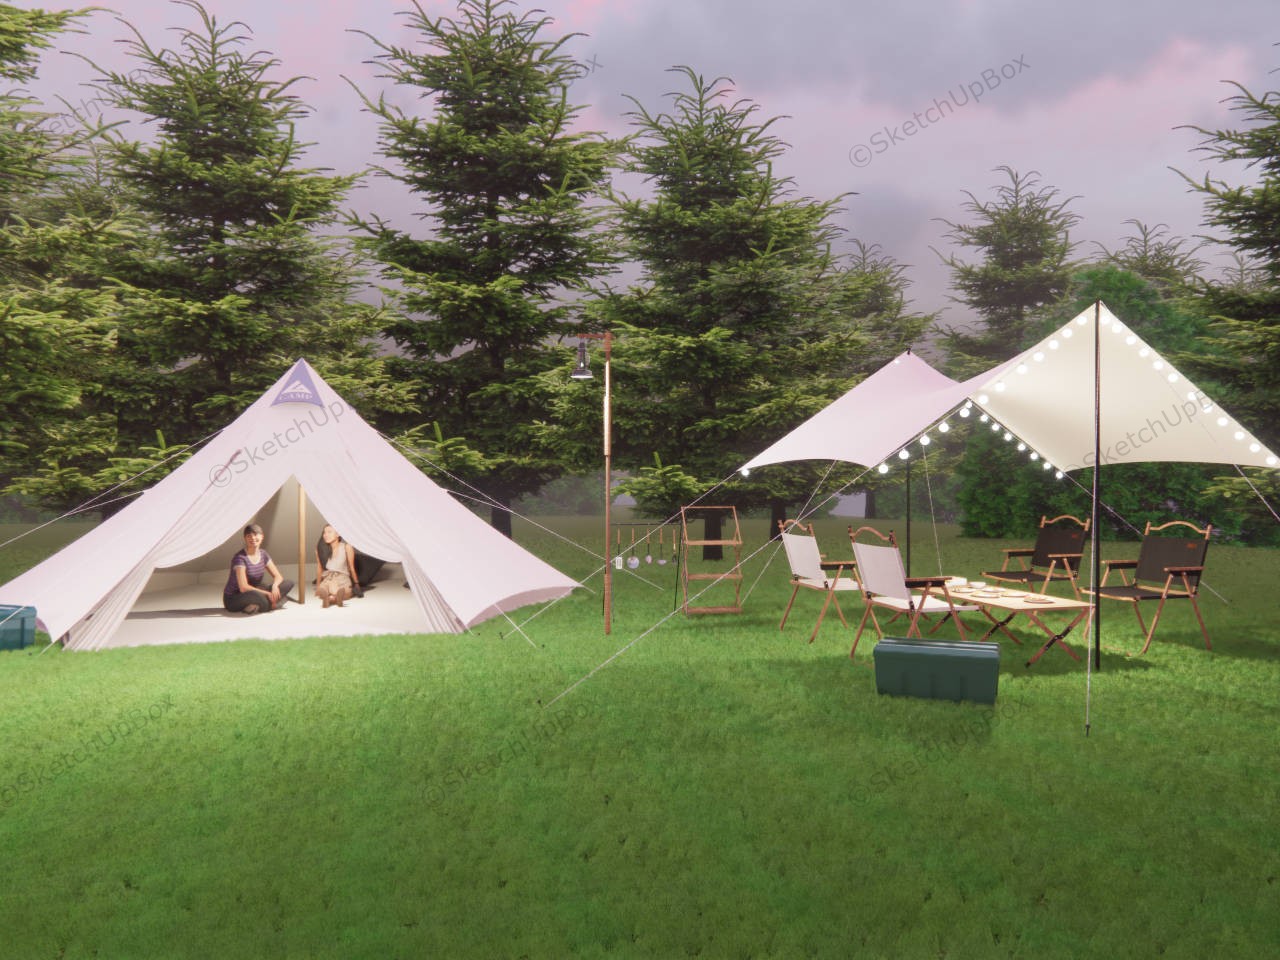 Family Campsite Decorating Idea sketchup model preview - SketchupBox